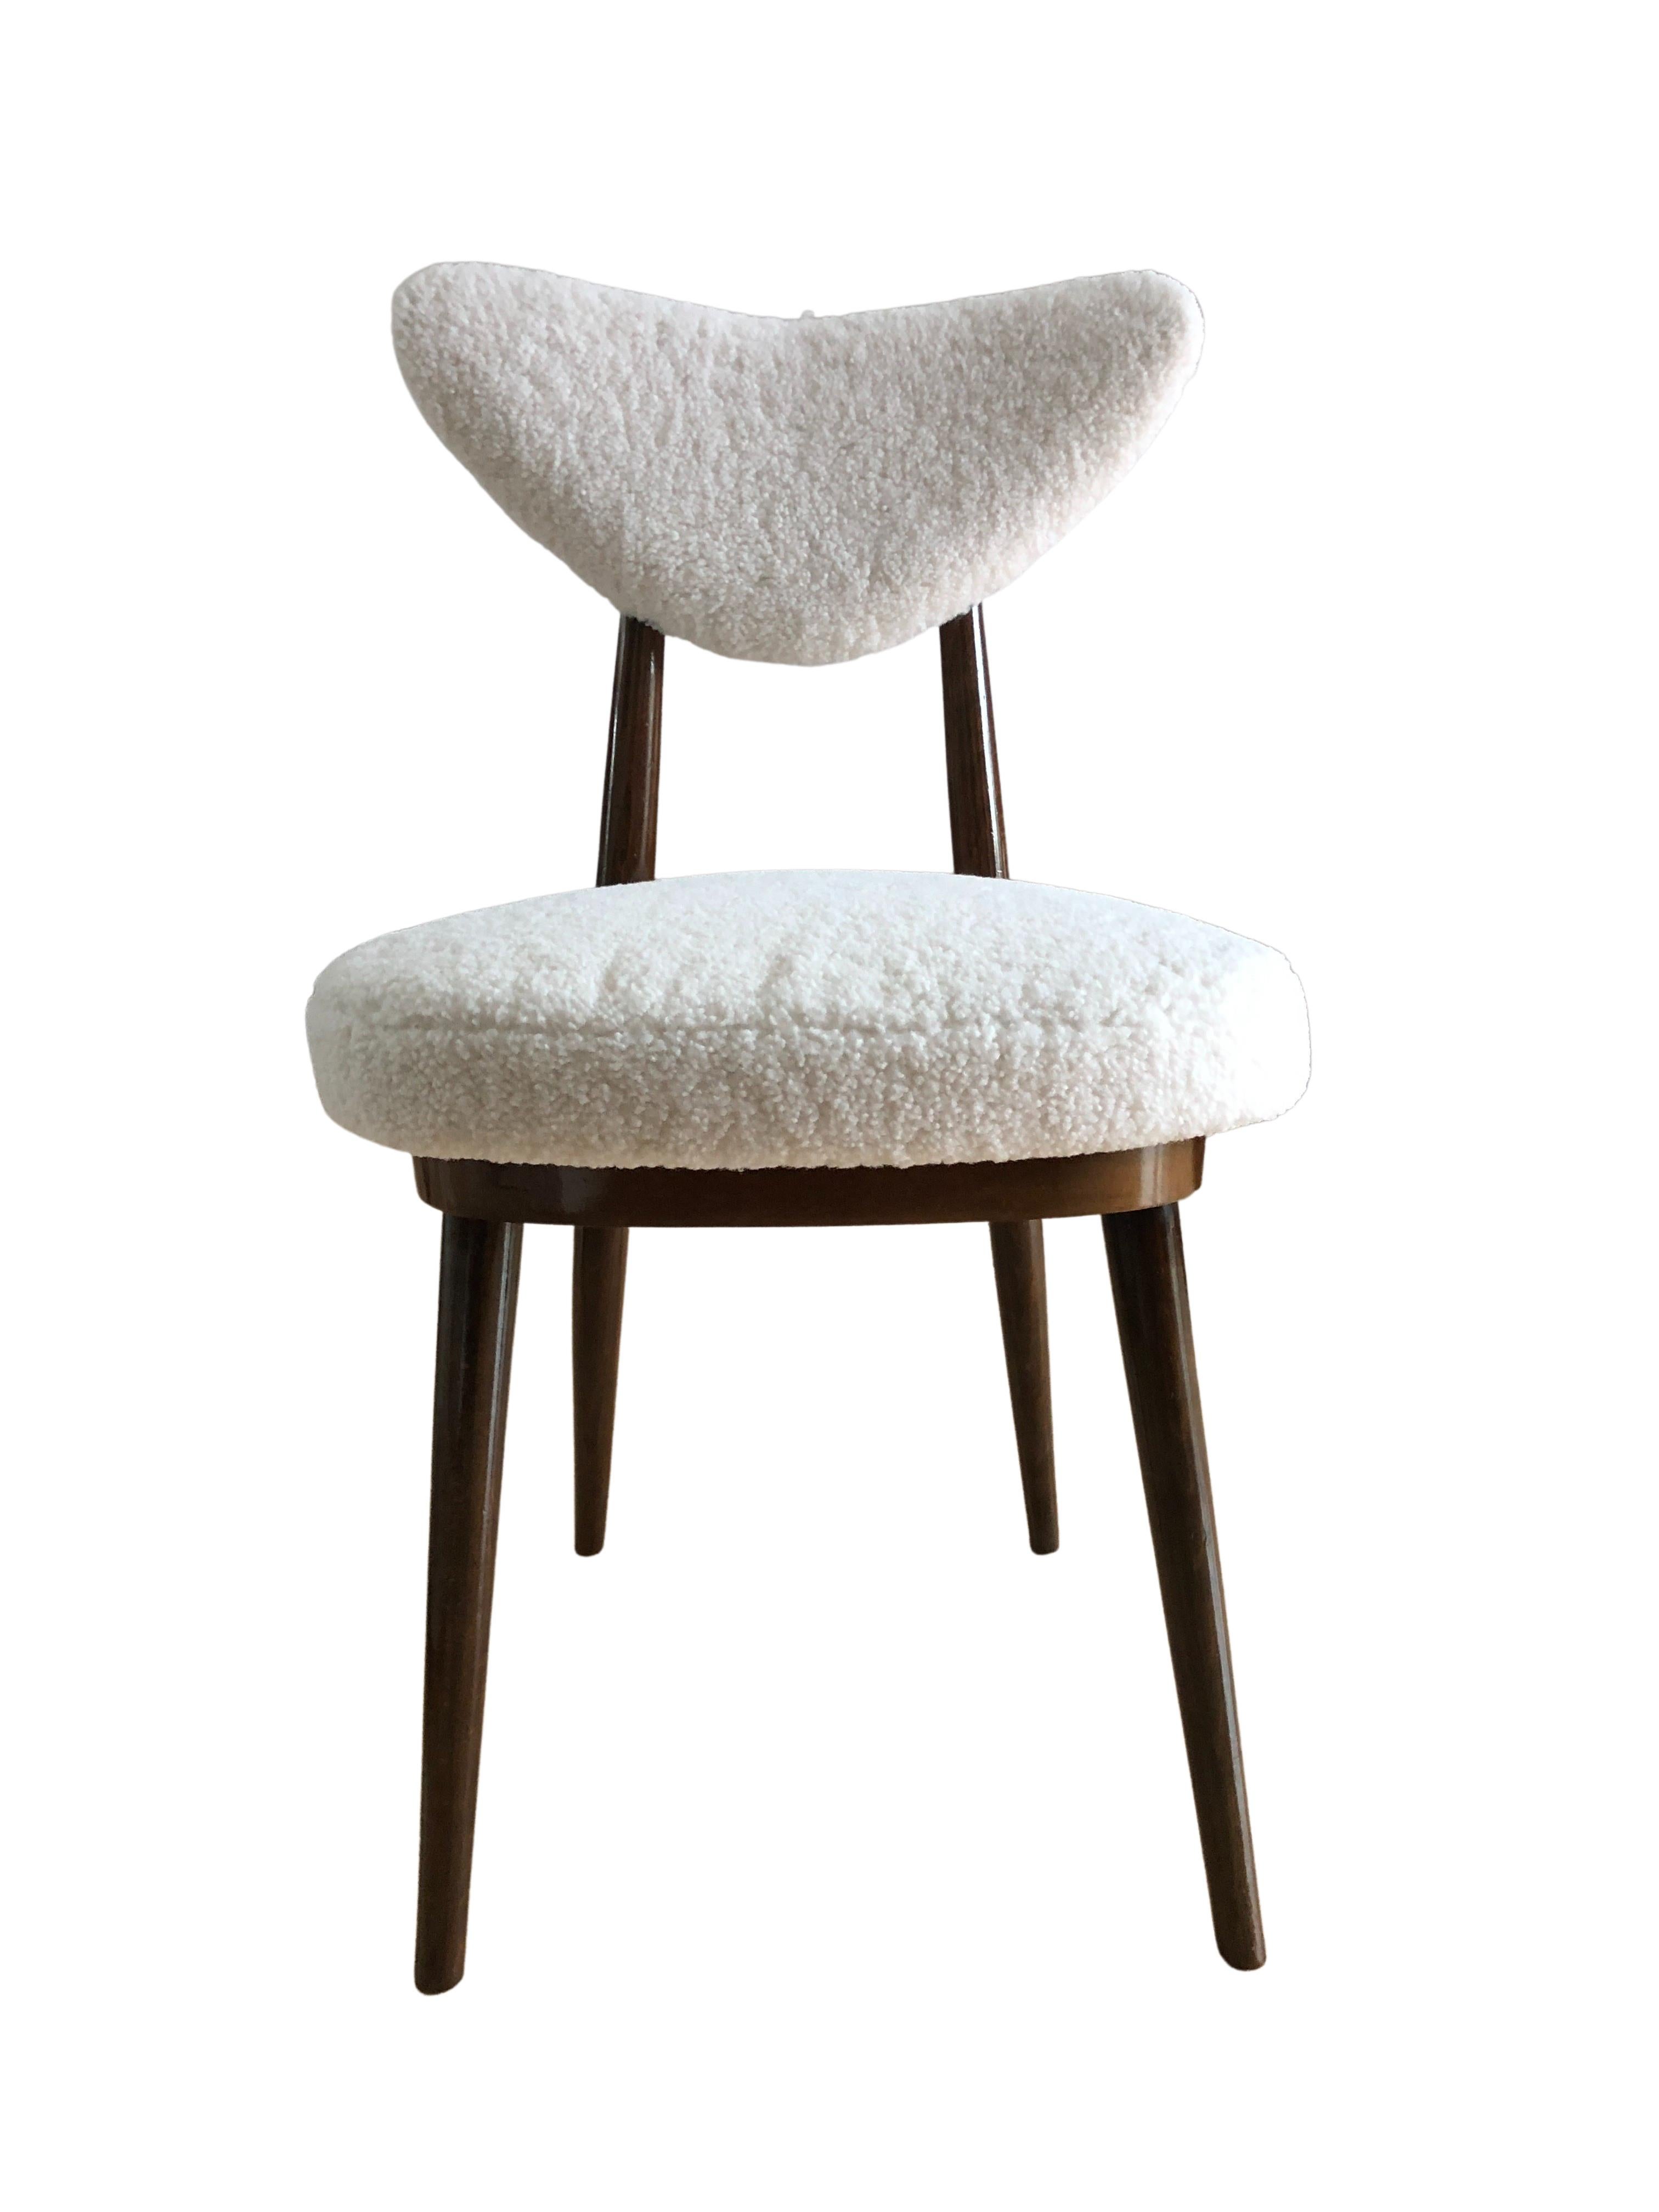 20th Century Midcentury White bouclé Heart Chair, by Kurmanowicz, 1960s For Sale